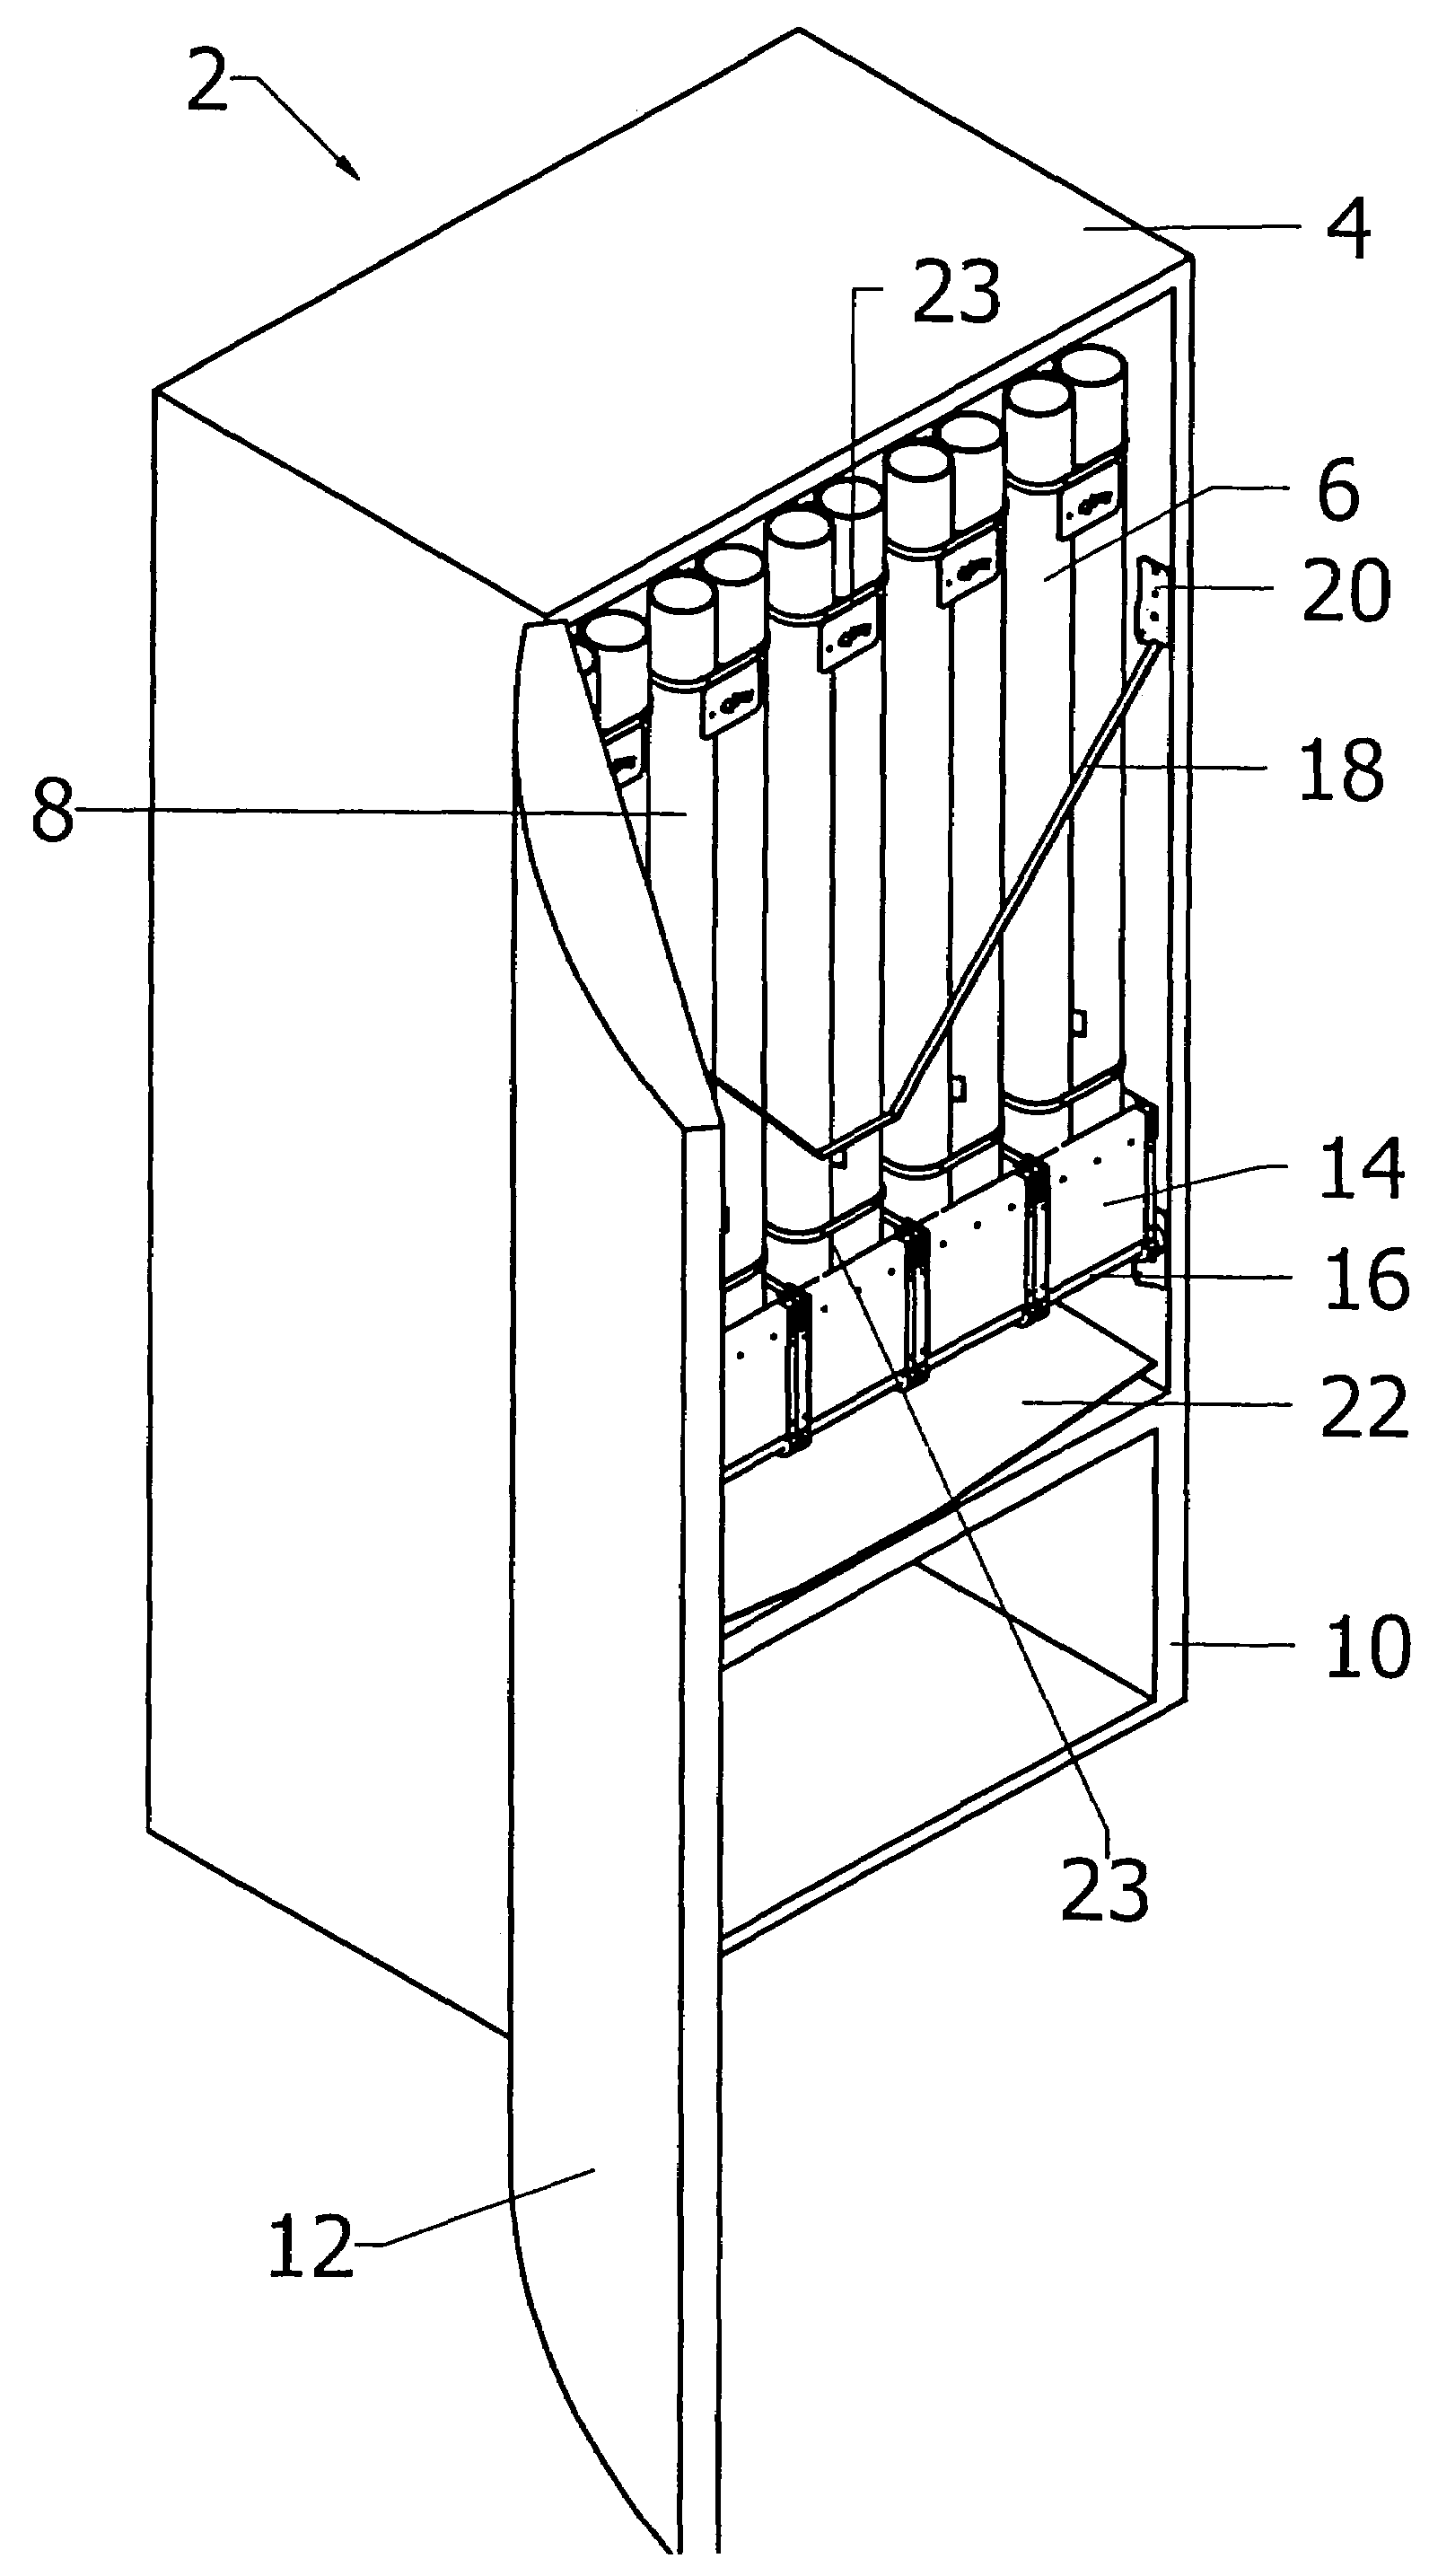 Dispensing machine to store and dispense elongated containers vertically